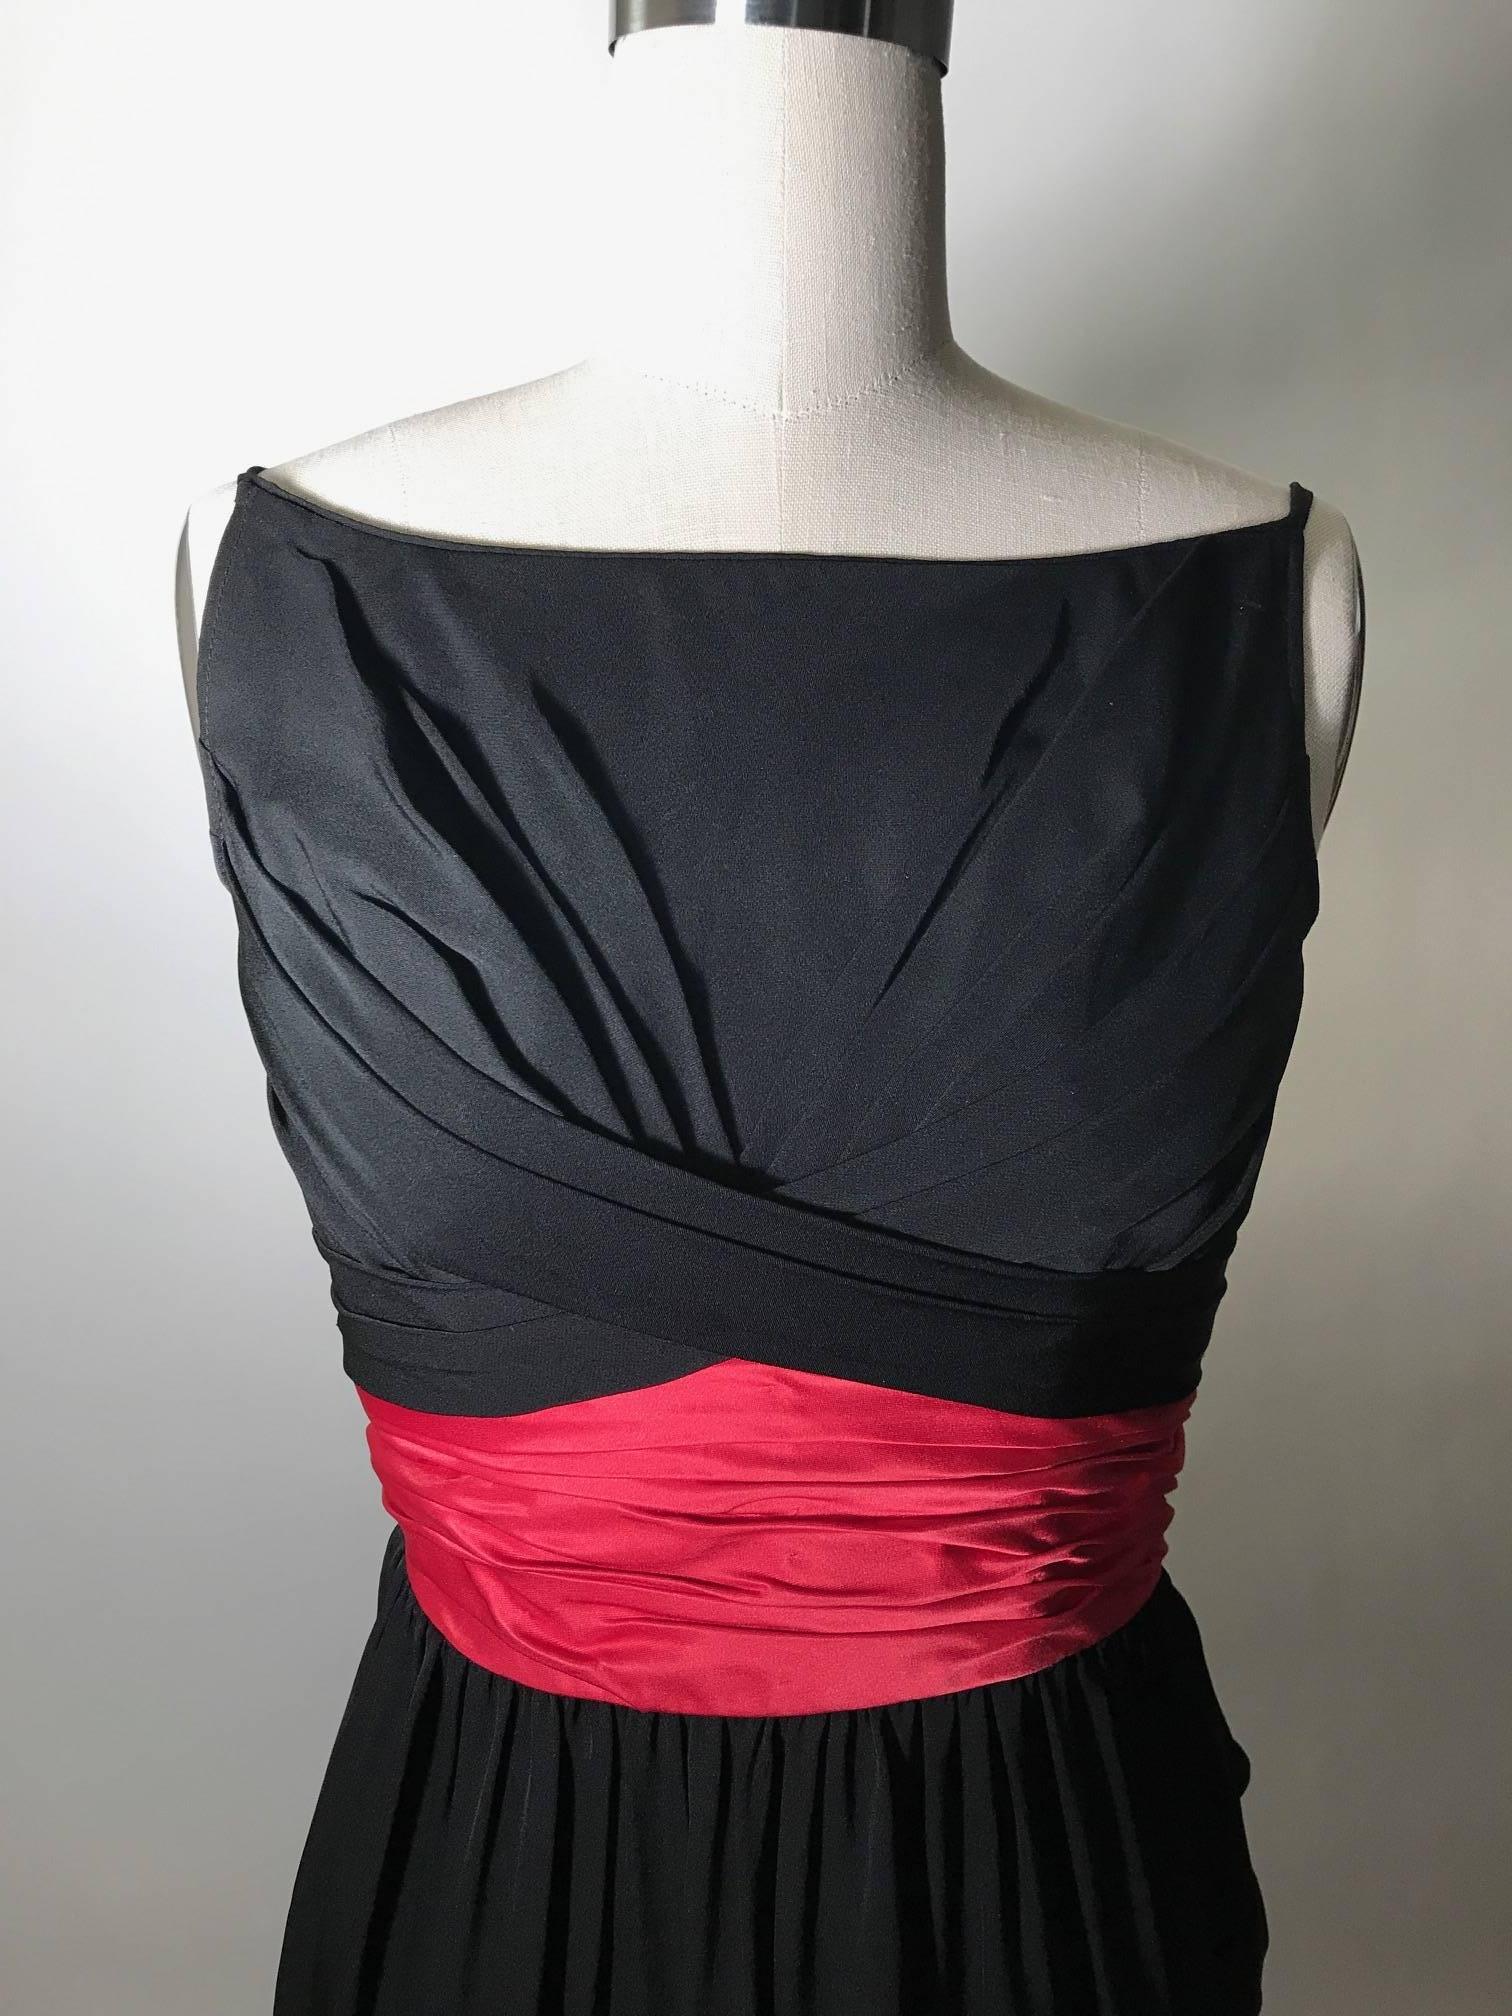 Ceil Chapman vintage 1950s black boatneck dress with pleated detail at front and back bodice. Skirt is gathered at deep pink/red attached waist sash/cumberbund. Back zip (there are hook and eyes along back zip to conceal the zipper, but we could not